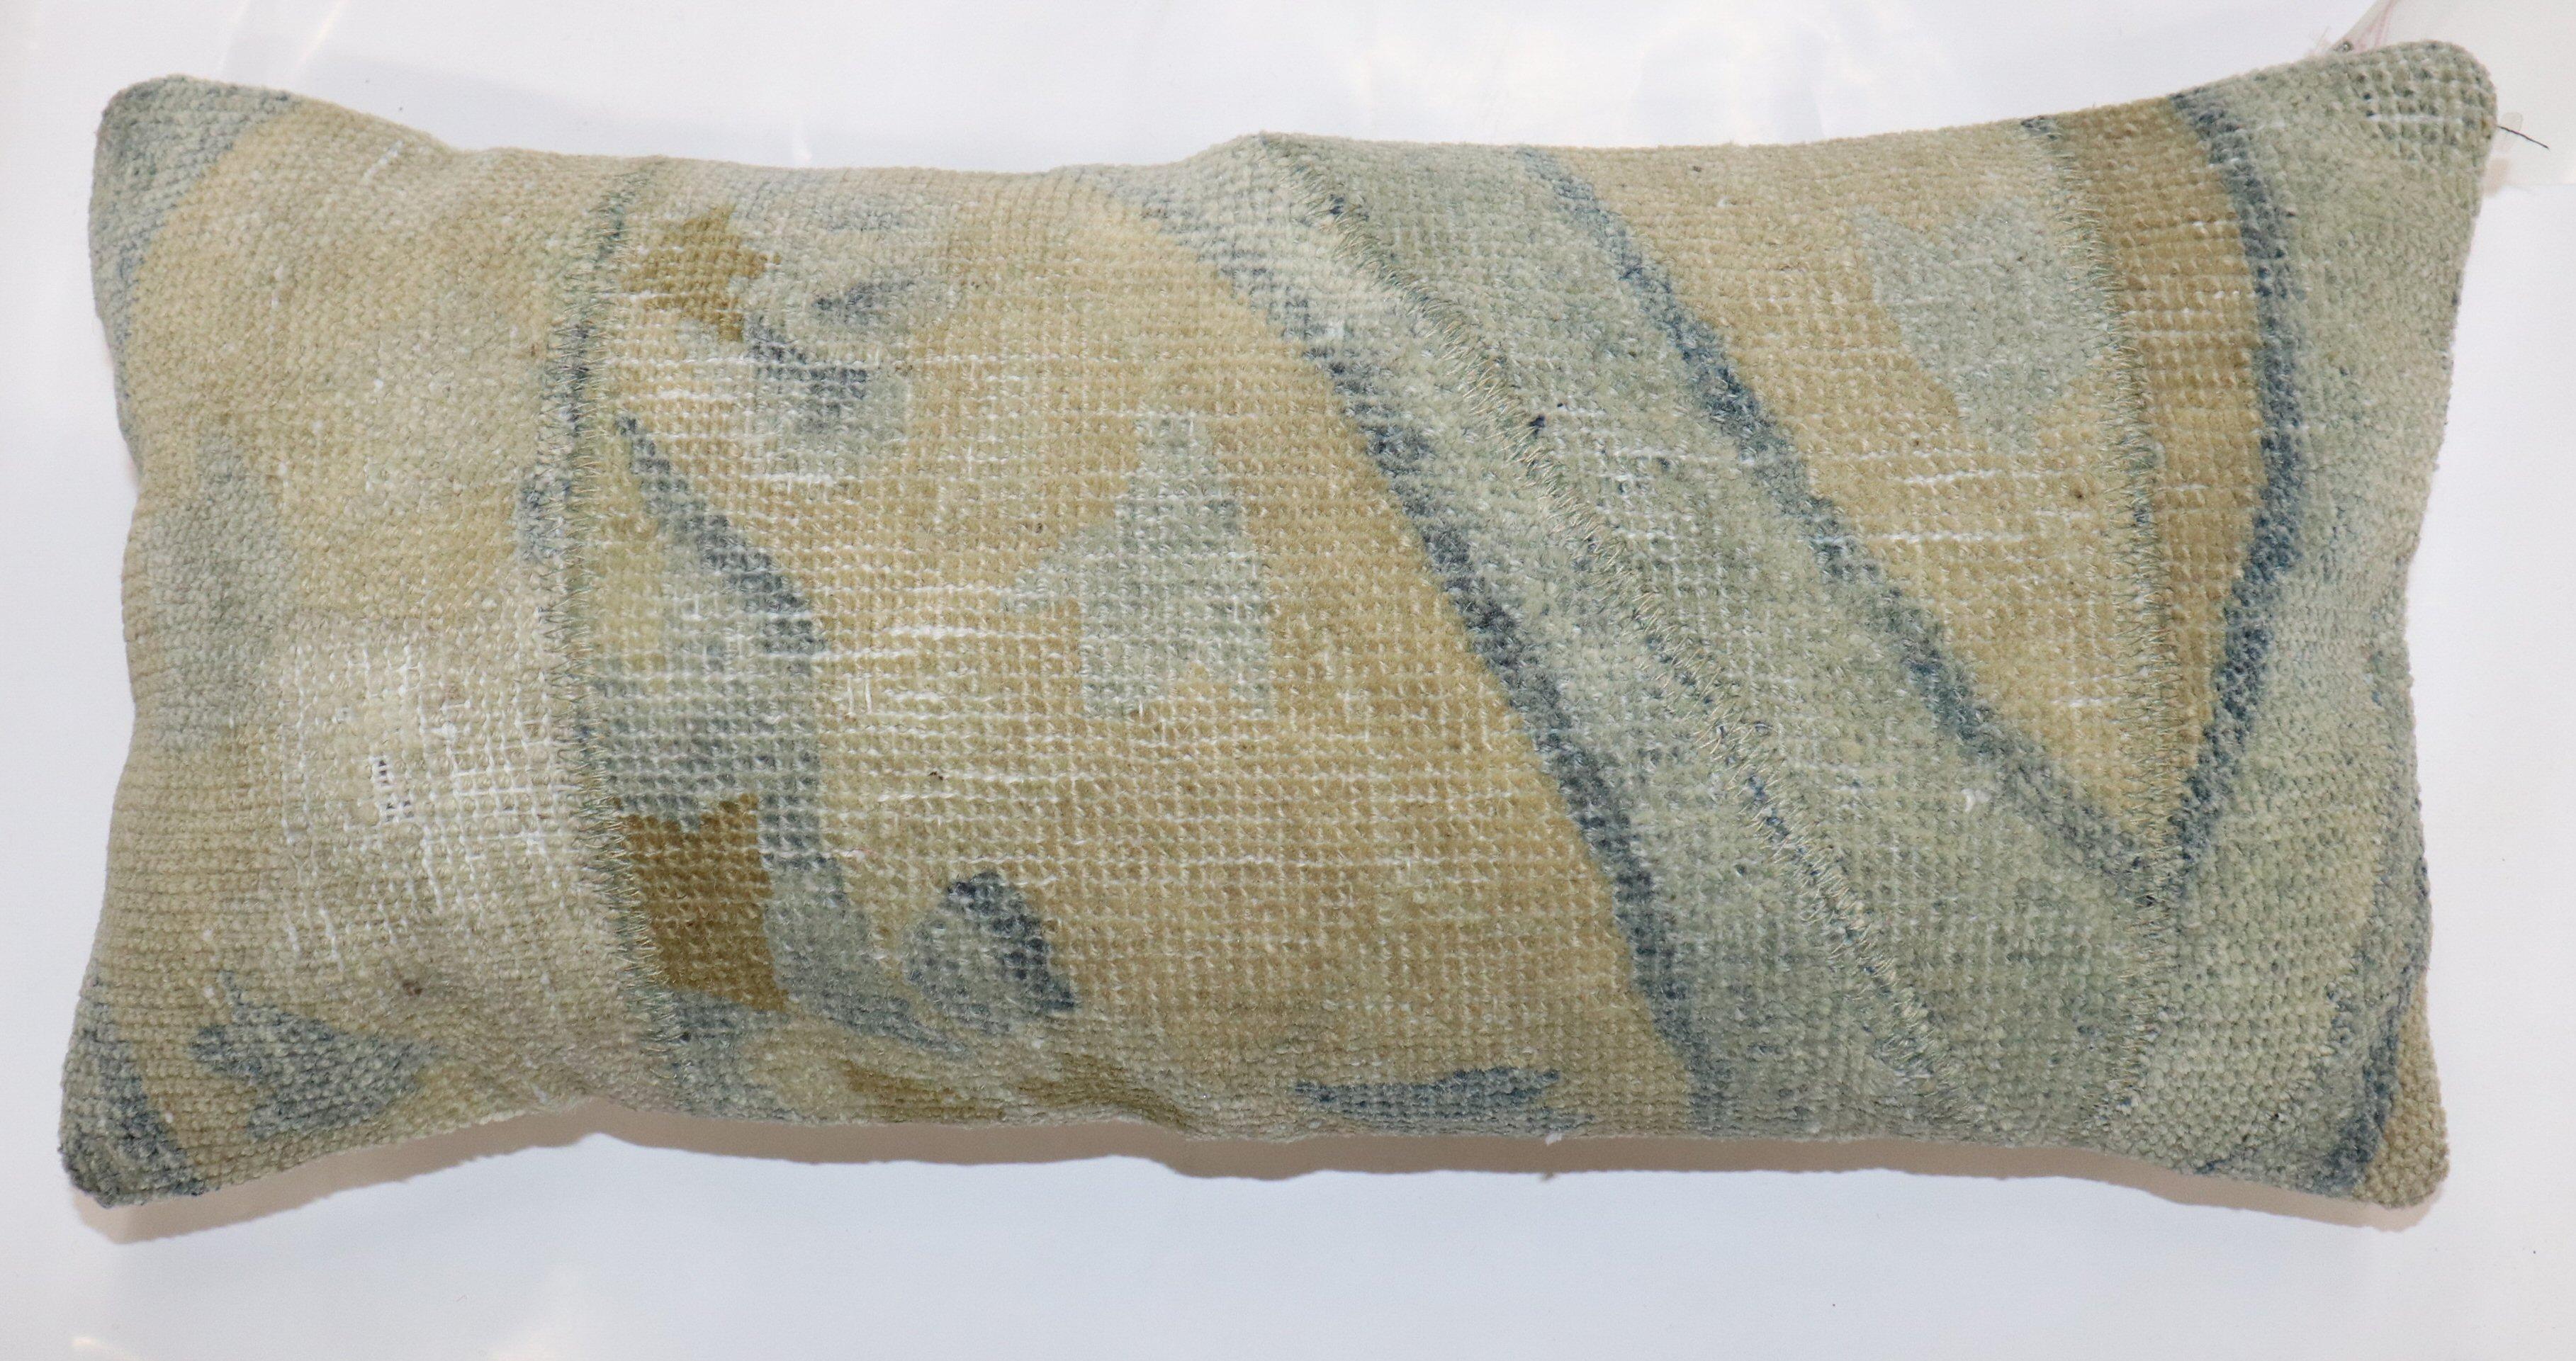 Bolster size Pillow made from a antique chinese rug

Measures: 9